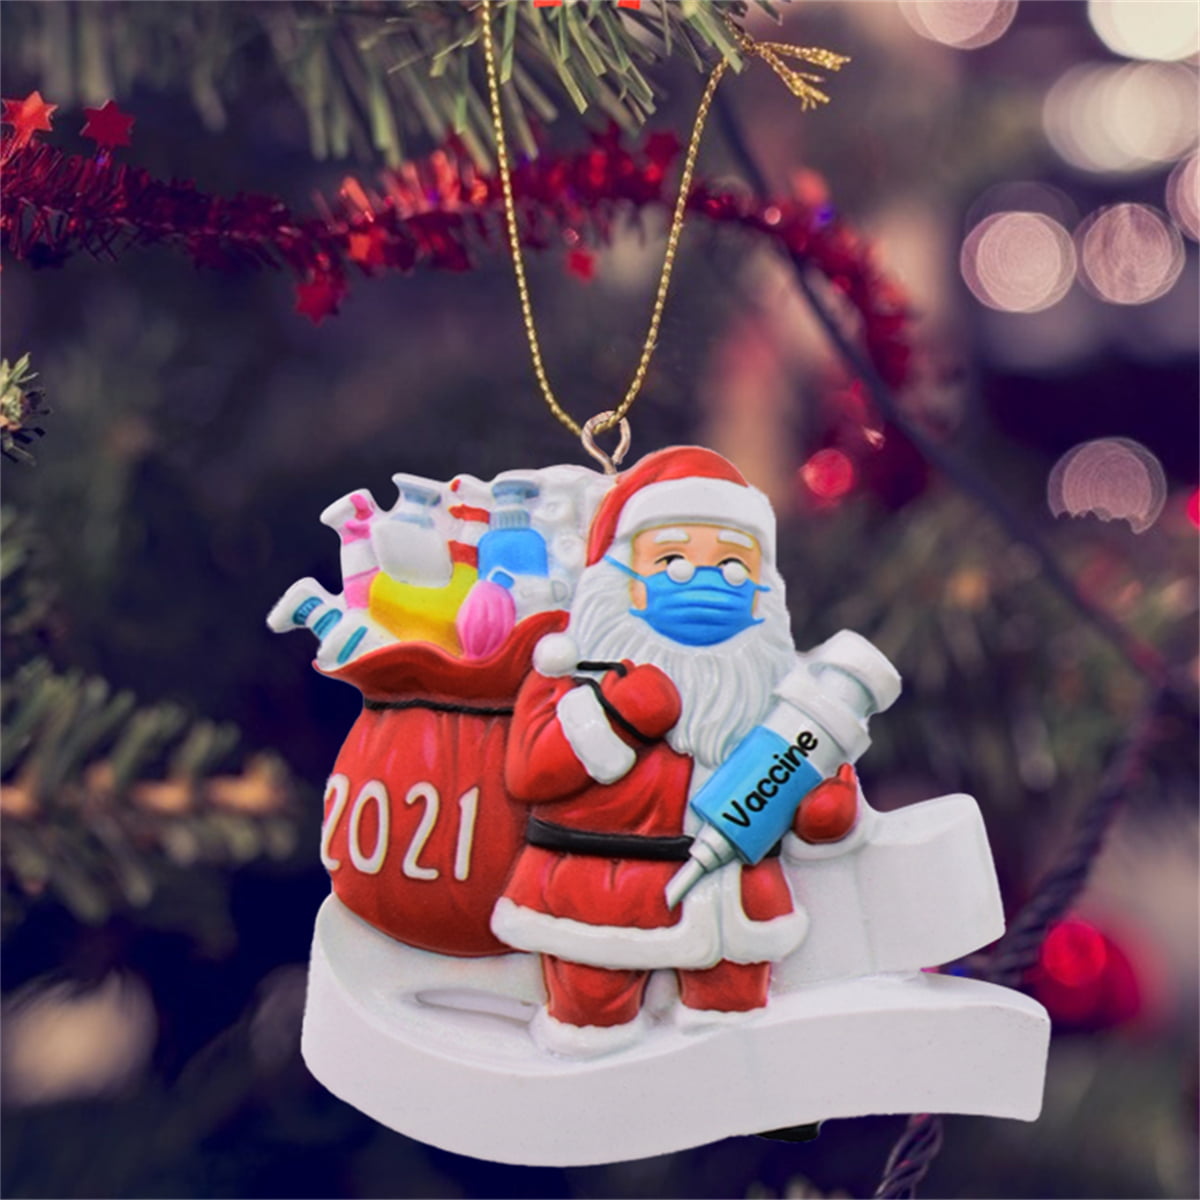 Hanging Ornament,Santa Claus with Tradition Home Decor for Family Indoor Home Decor Gifts. Christmas Tree Decoration Pendant A 2021 Santa Claus Ornaments